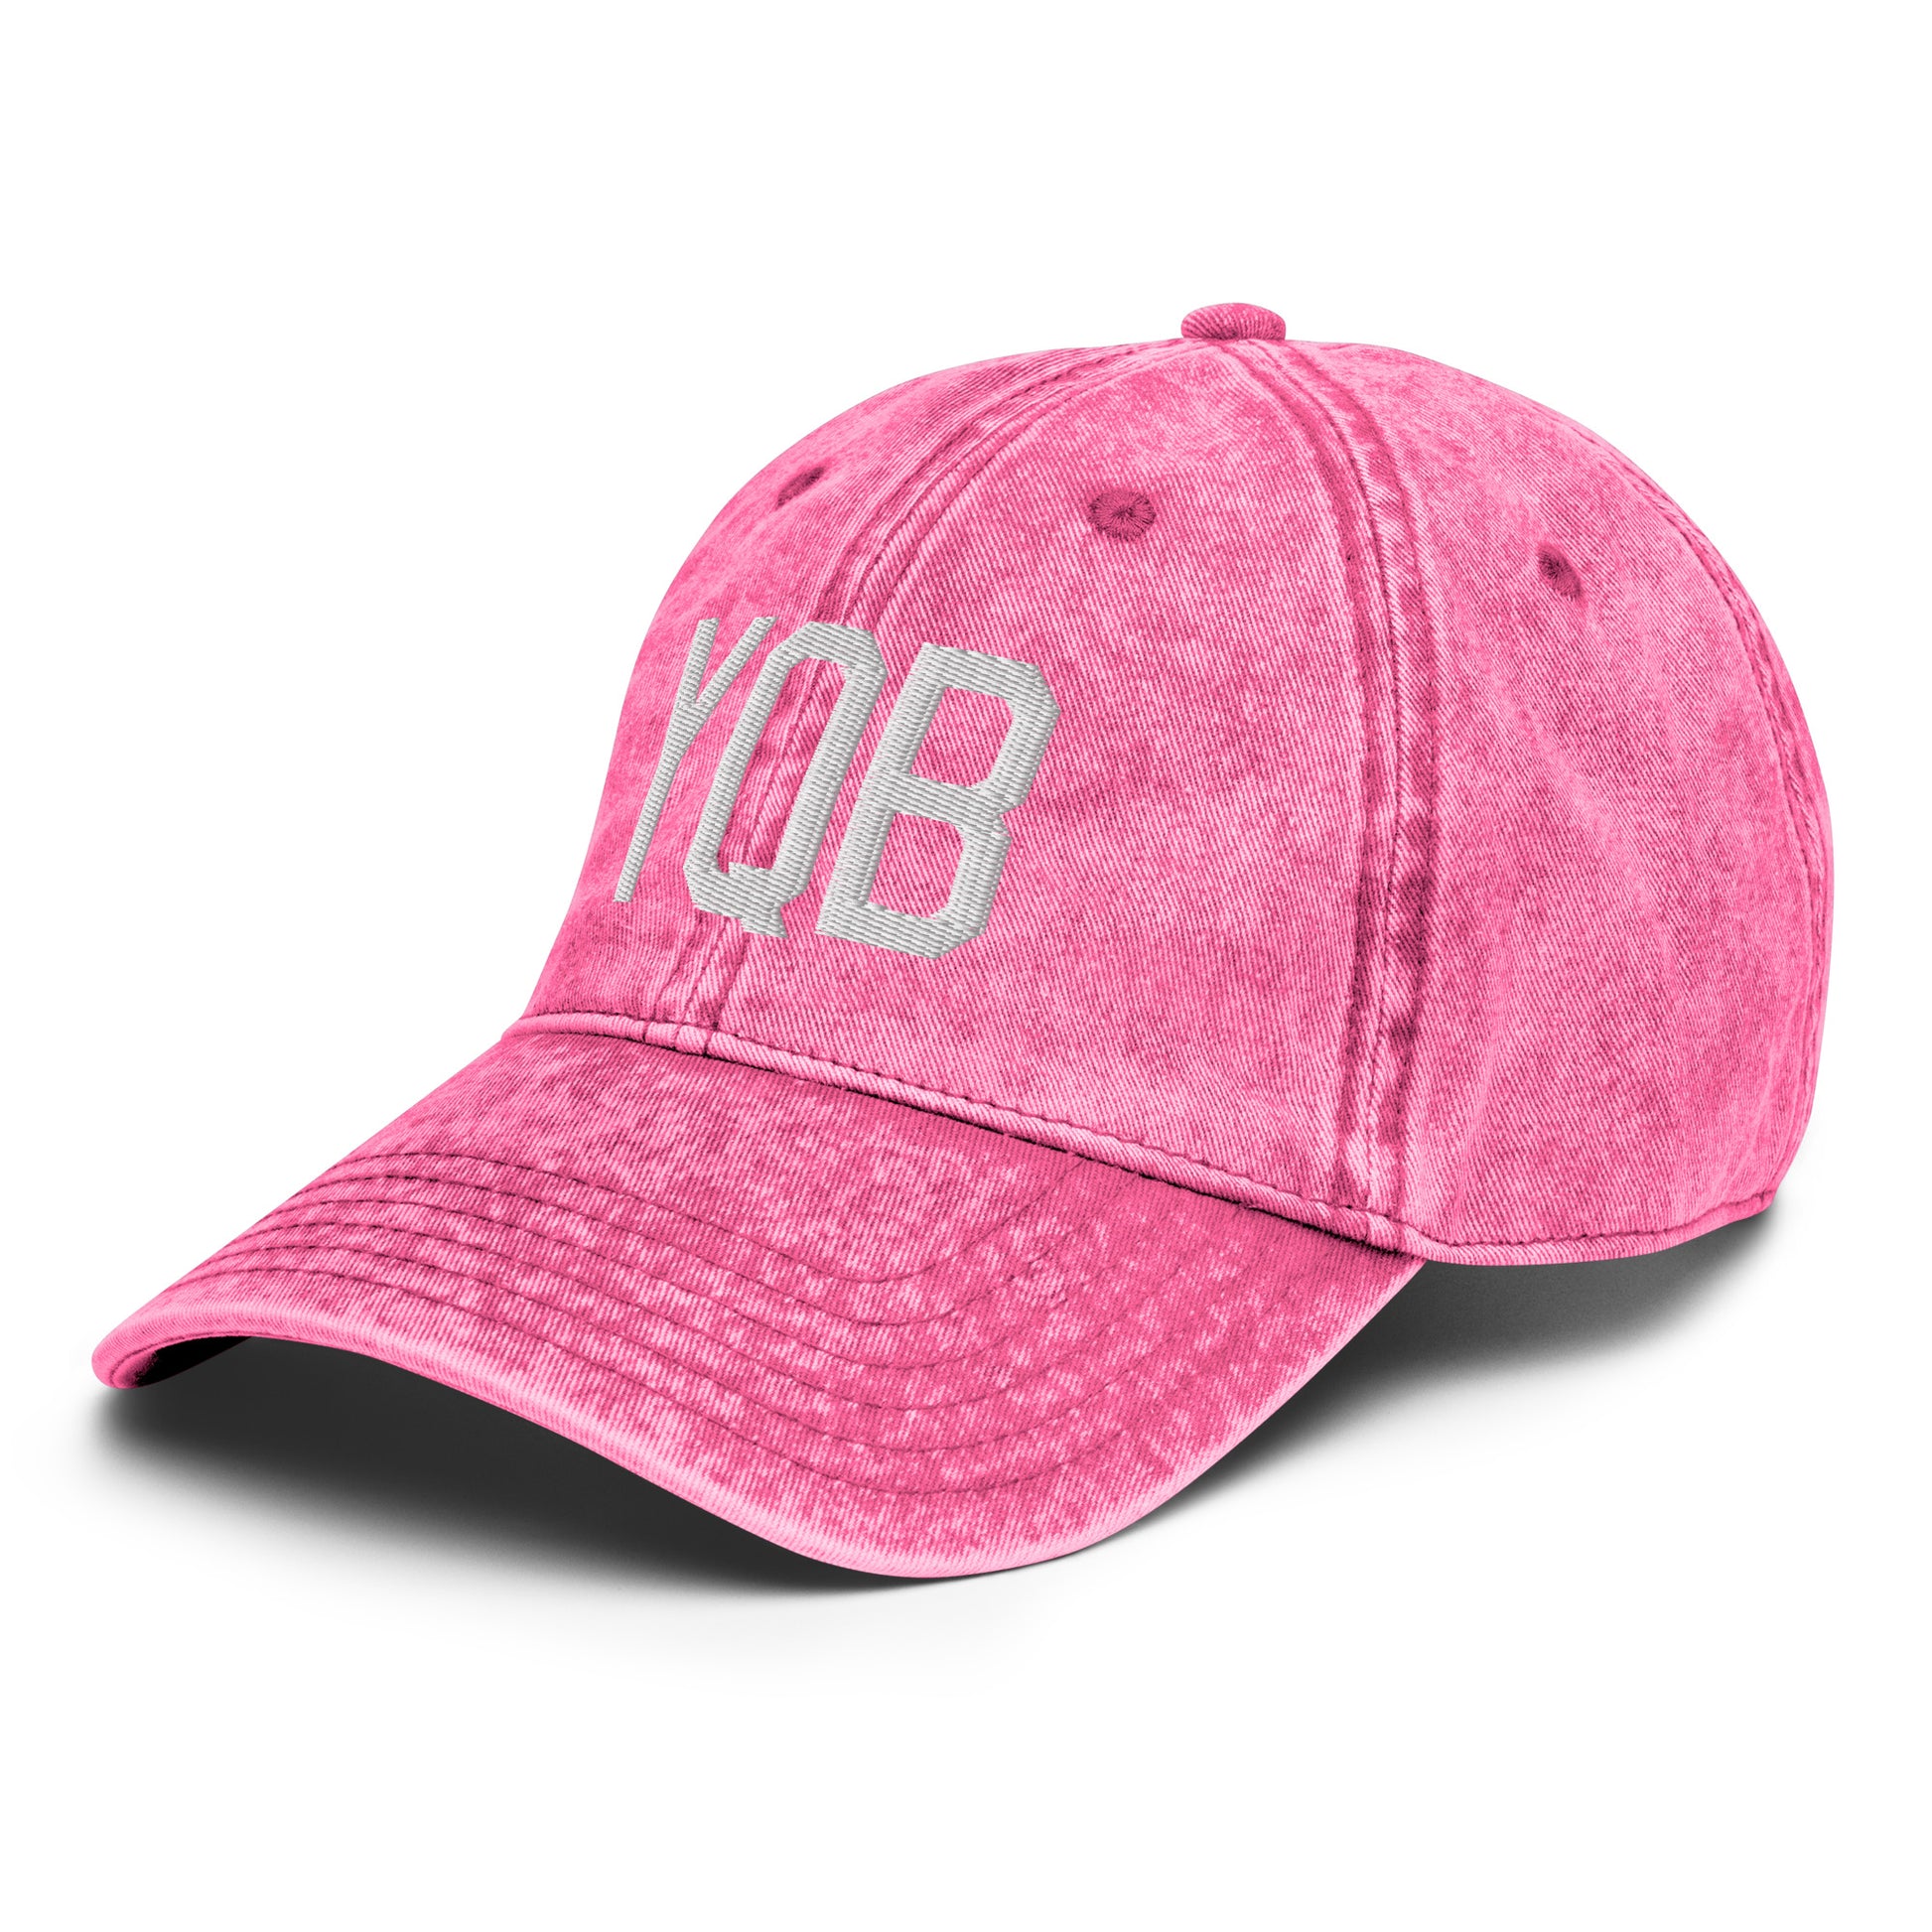 Airport Code Twill Cap - White • YQB Quebec City • YHM Designs - Image 26